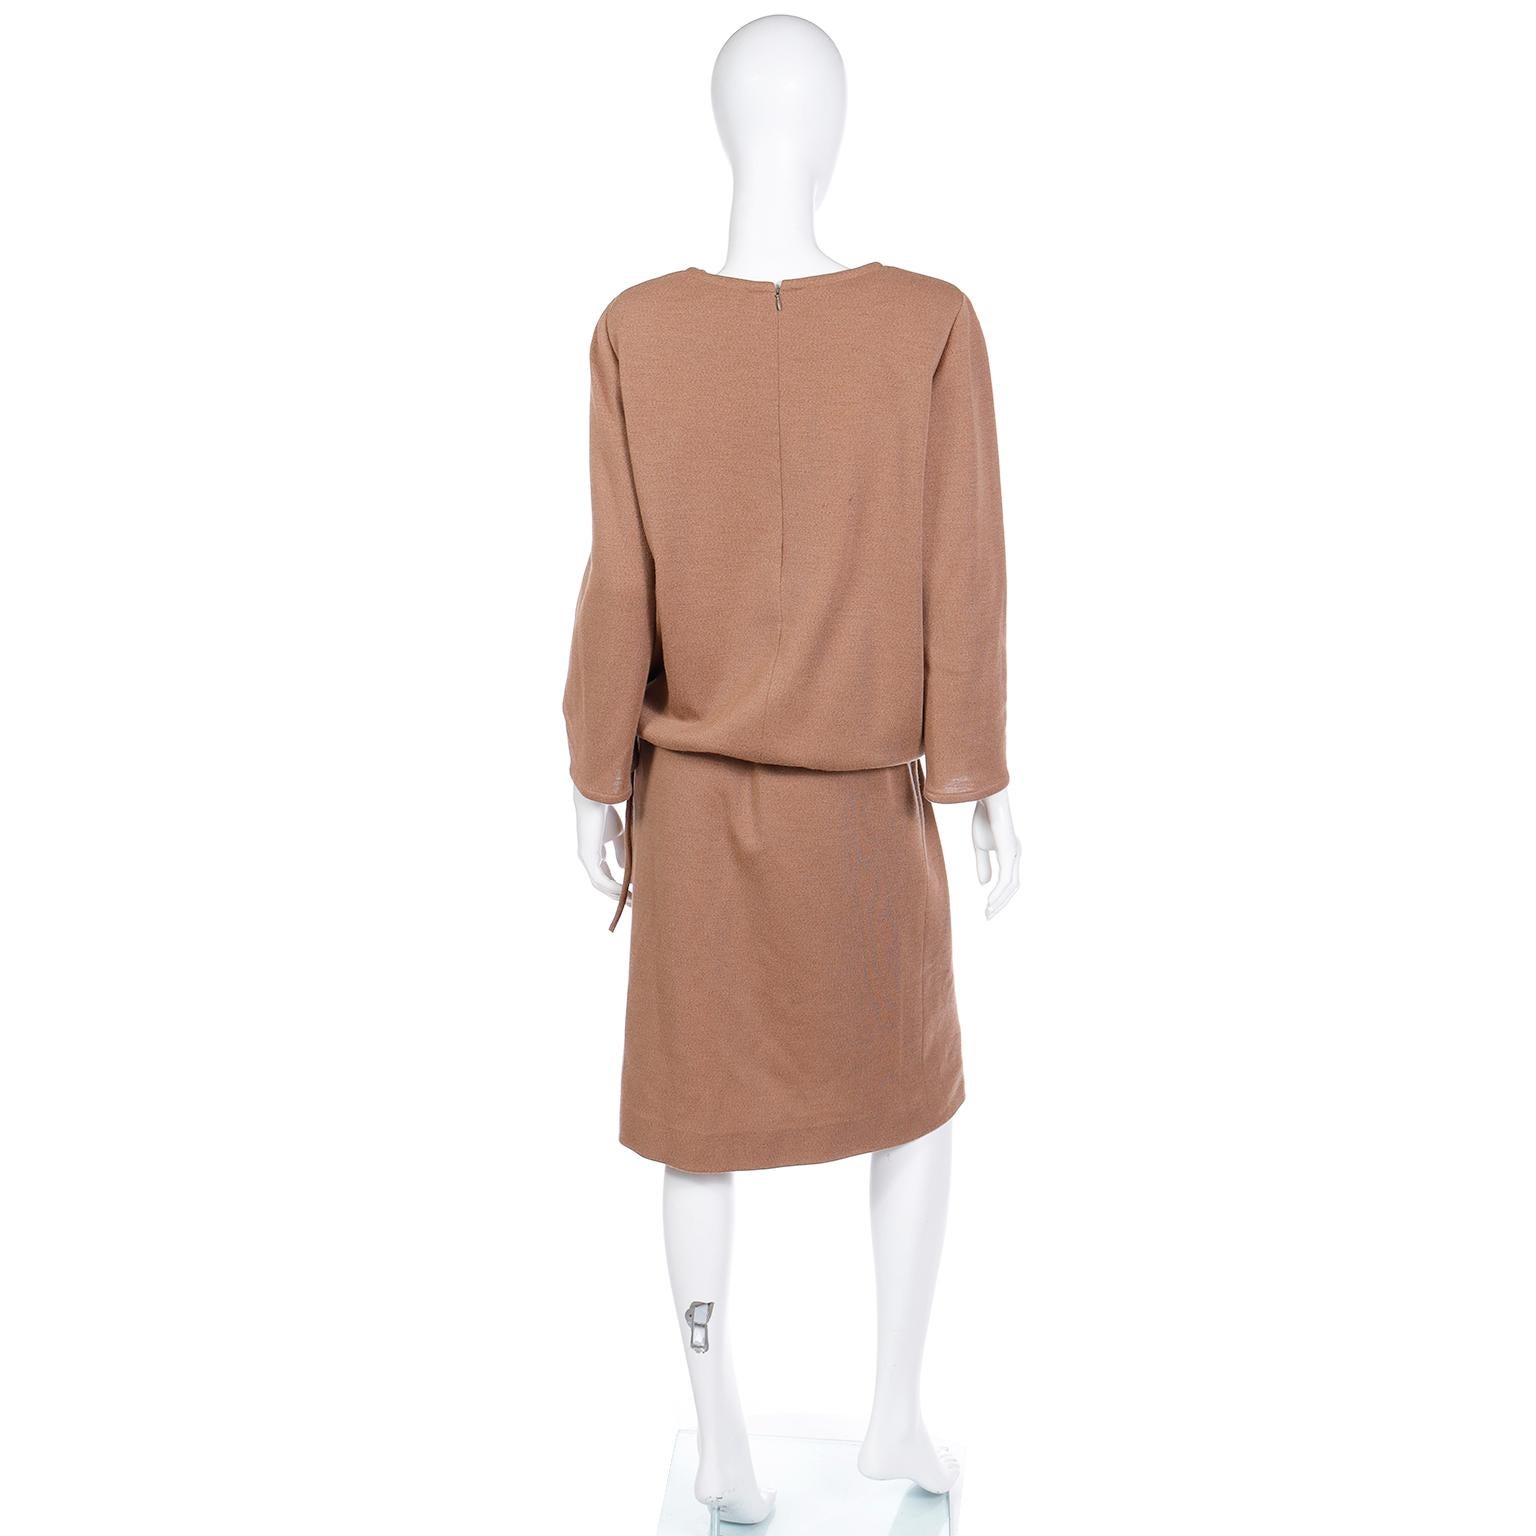 Women's 1970s Vintage Bill Blass 2Pc Camel Knit Outfit With Drawstring Top & Skirt